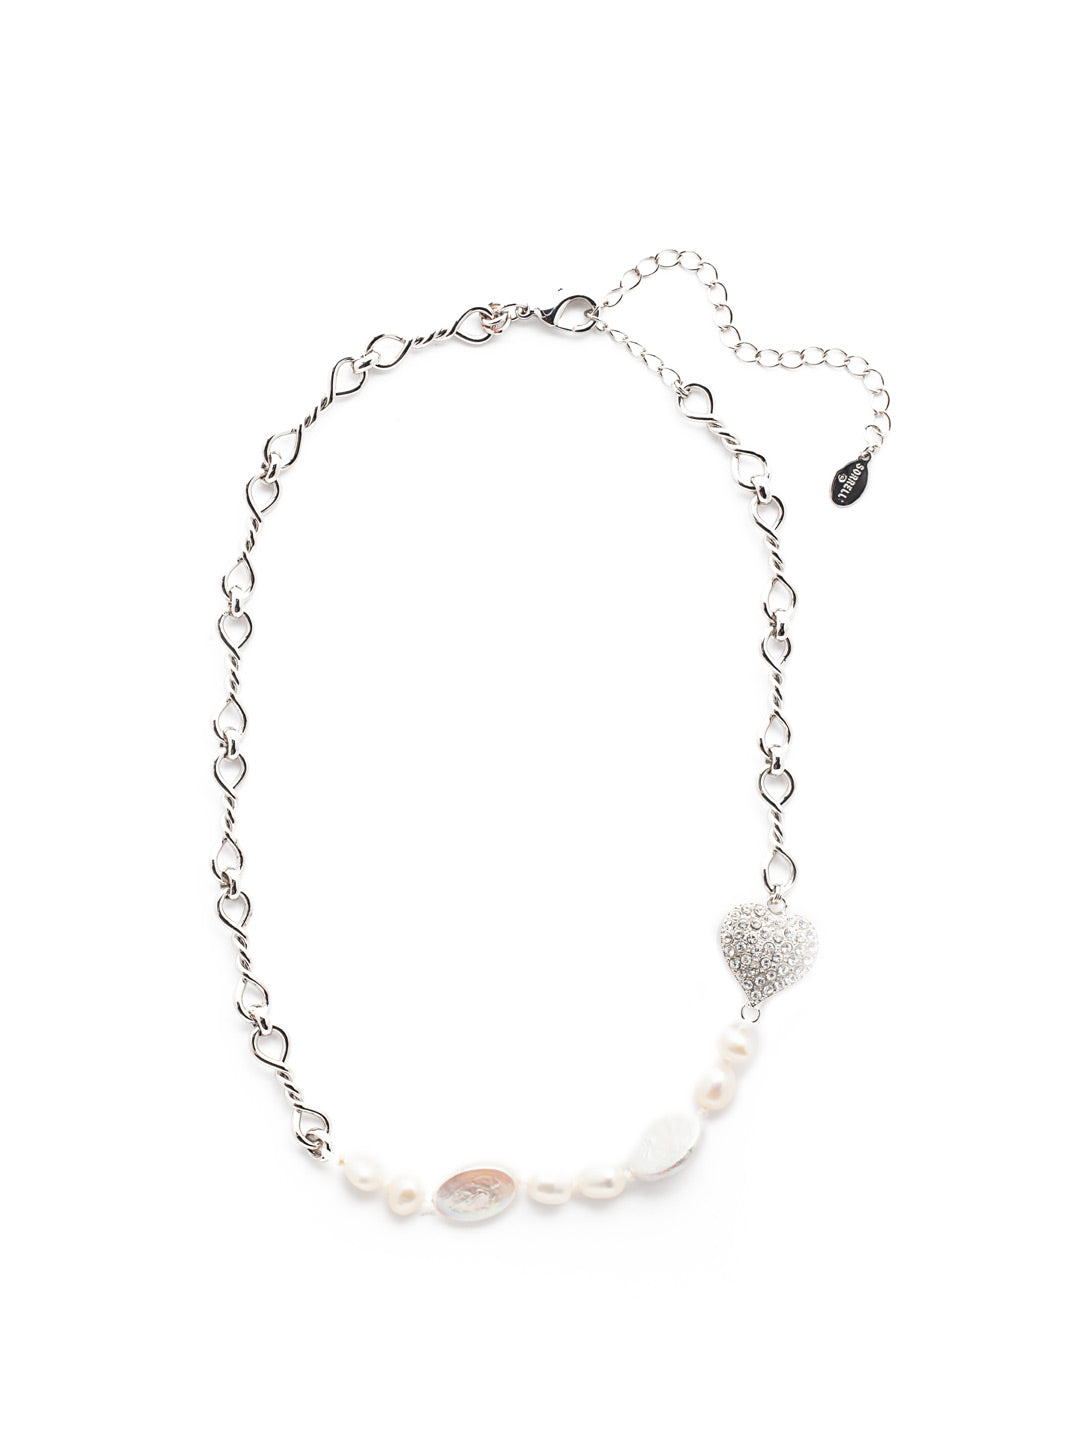 Venus Tennis Necklace - NER10PDCRY - <p>Fasten on the Venus Tennis Necklace for something particularly pretty. Links of metalwork set the stage for an offest row of classic freshwater pearls and a sparkling crystal heart. From Sorrelli's Crystal collection in our Palladium finish.</p>